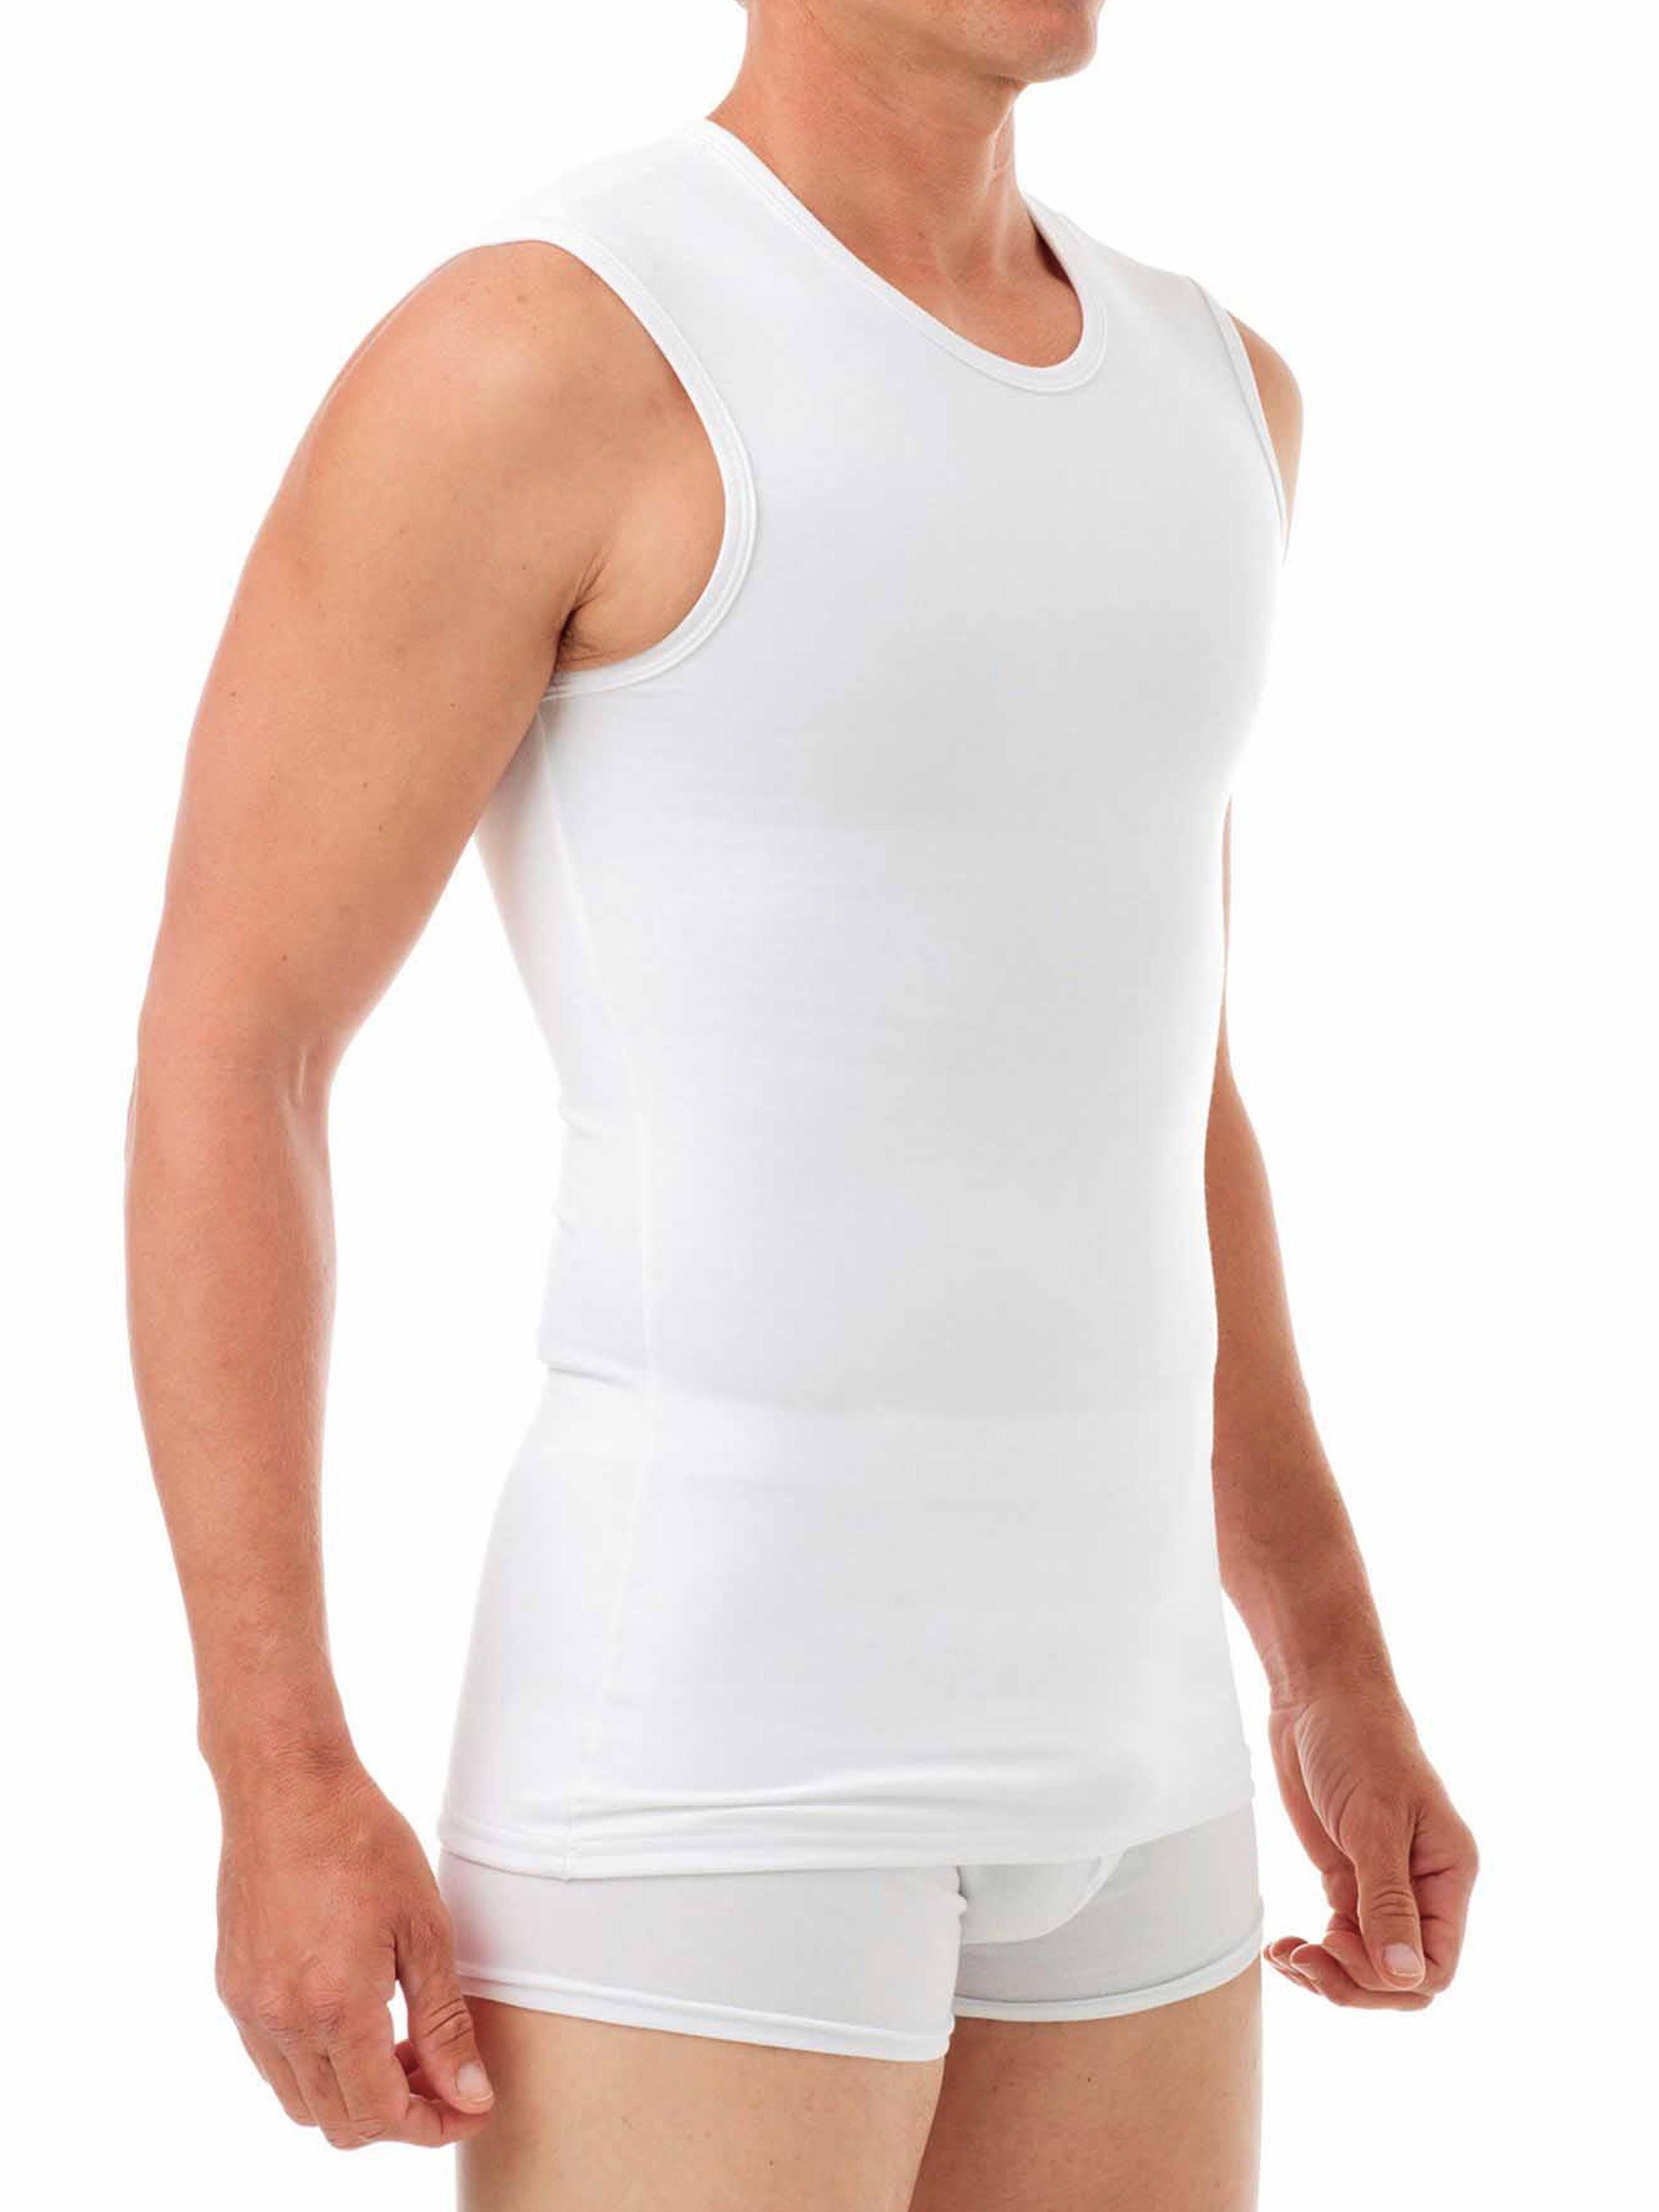 XBODY UK Compression Muscle Shirt | SALE